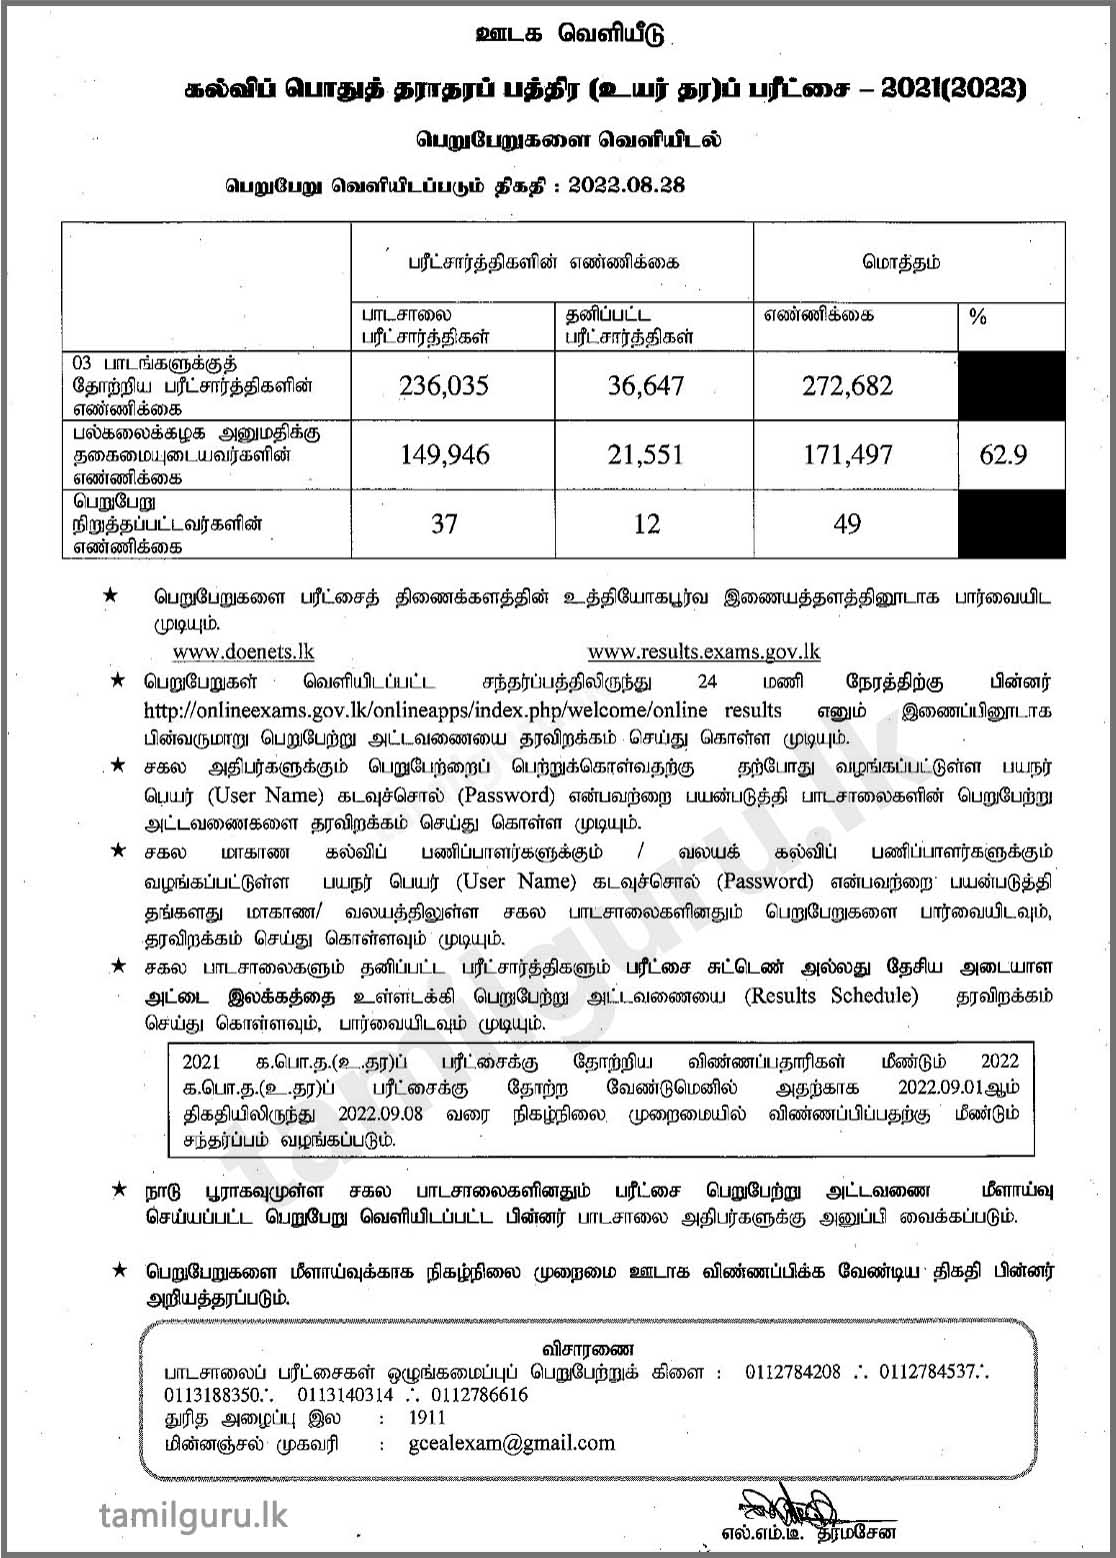 Press Release (Notice) from the Department of Examinations on G.C.E. A/L Examination Results 2021 (2022) (Details in Tamil)